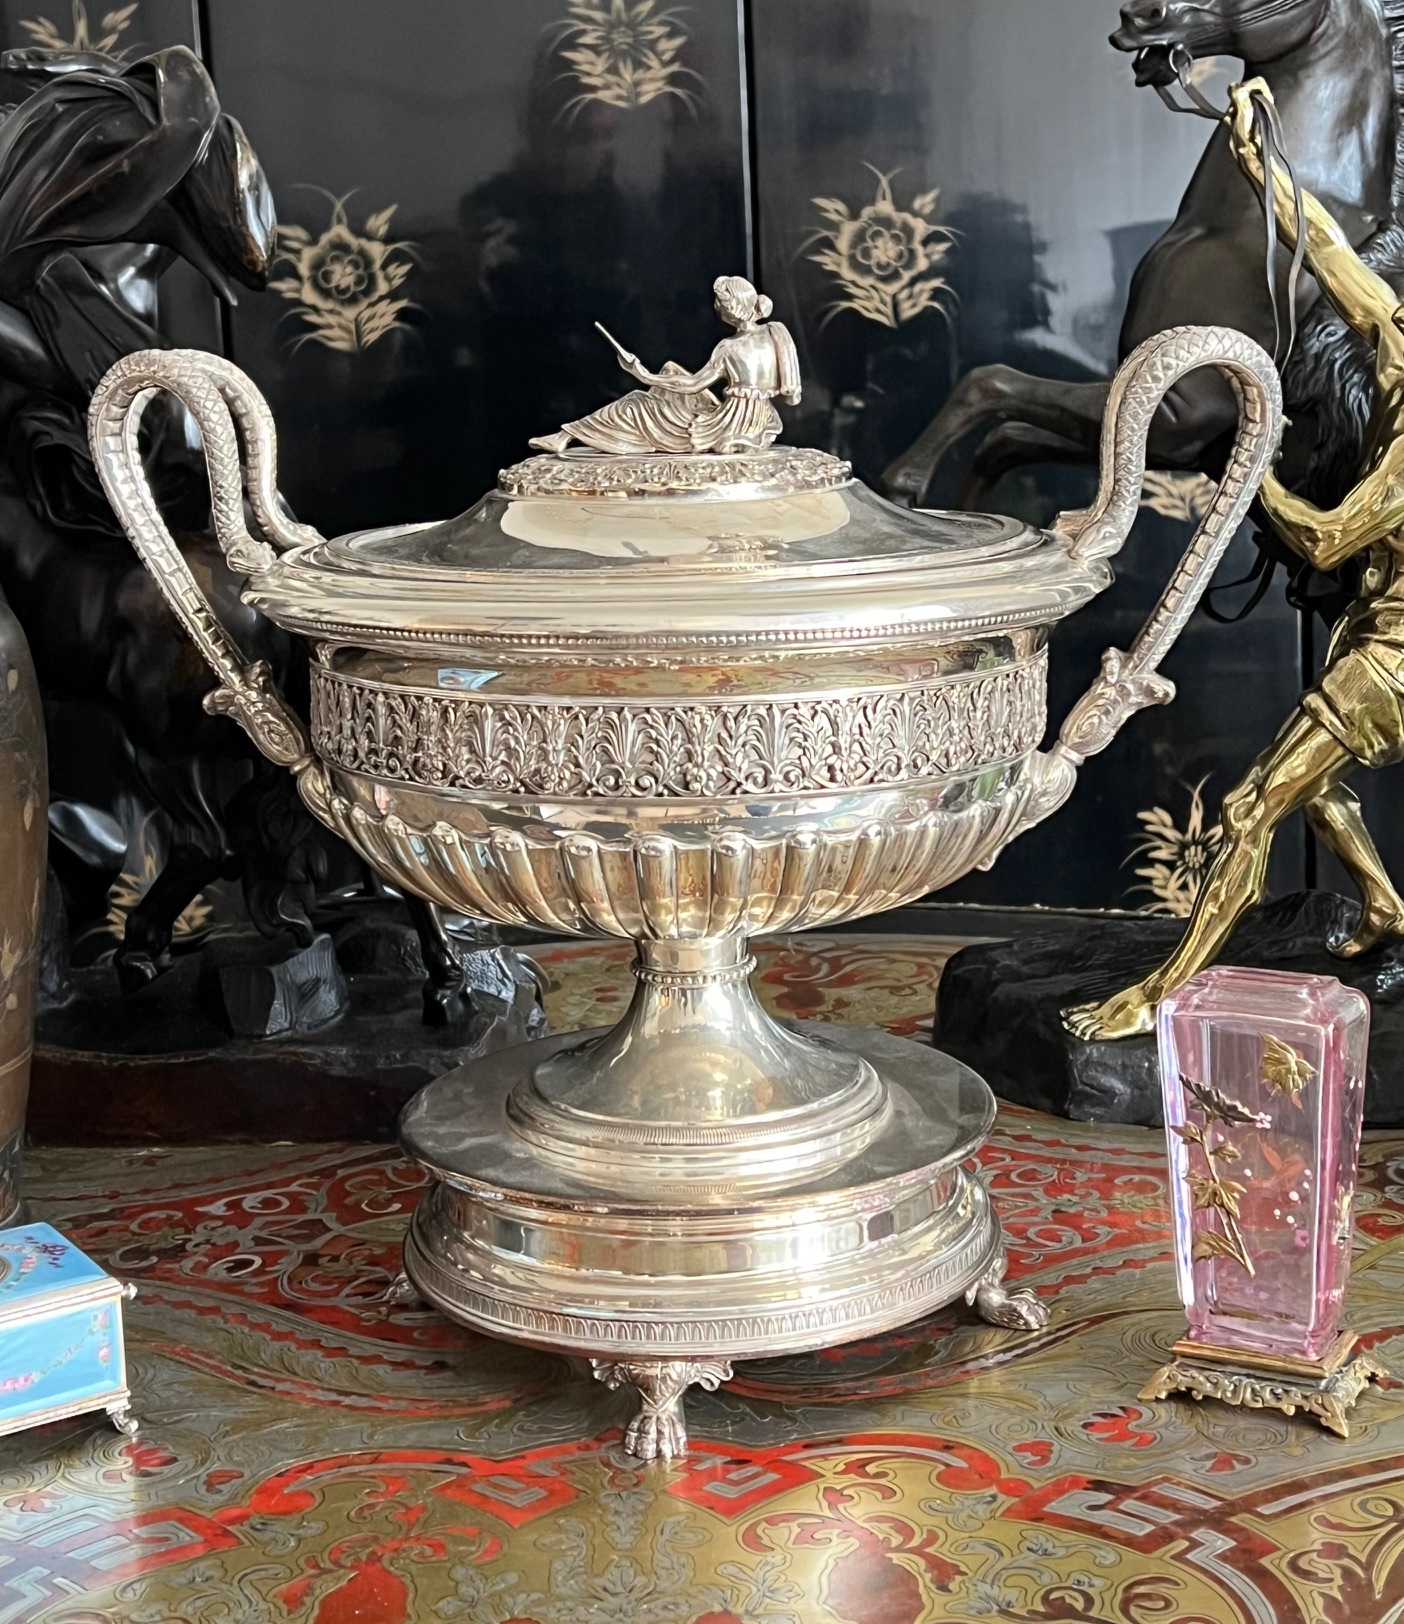 A VERY LARGE SILVER NEO-CLASSICAL STYLE URN AND COVER, ITALIAN, EARLY 20TH CENTURY - Image 10 of 13